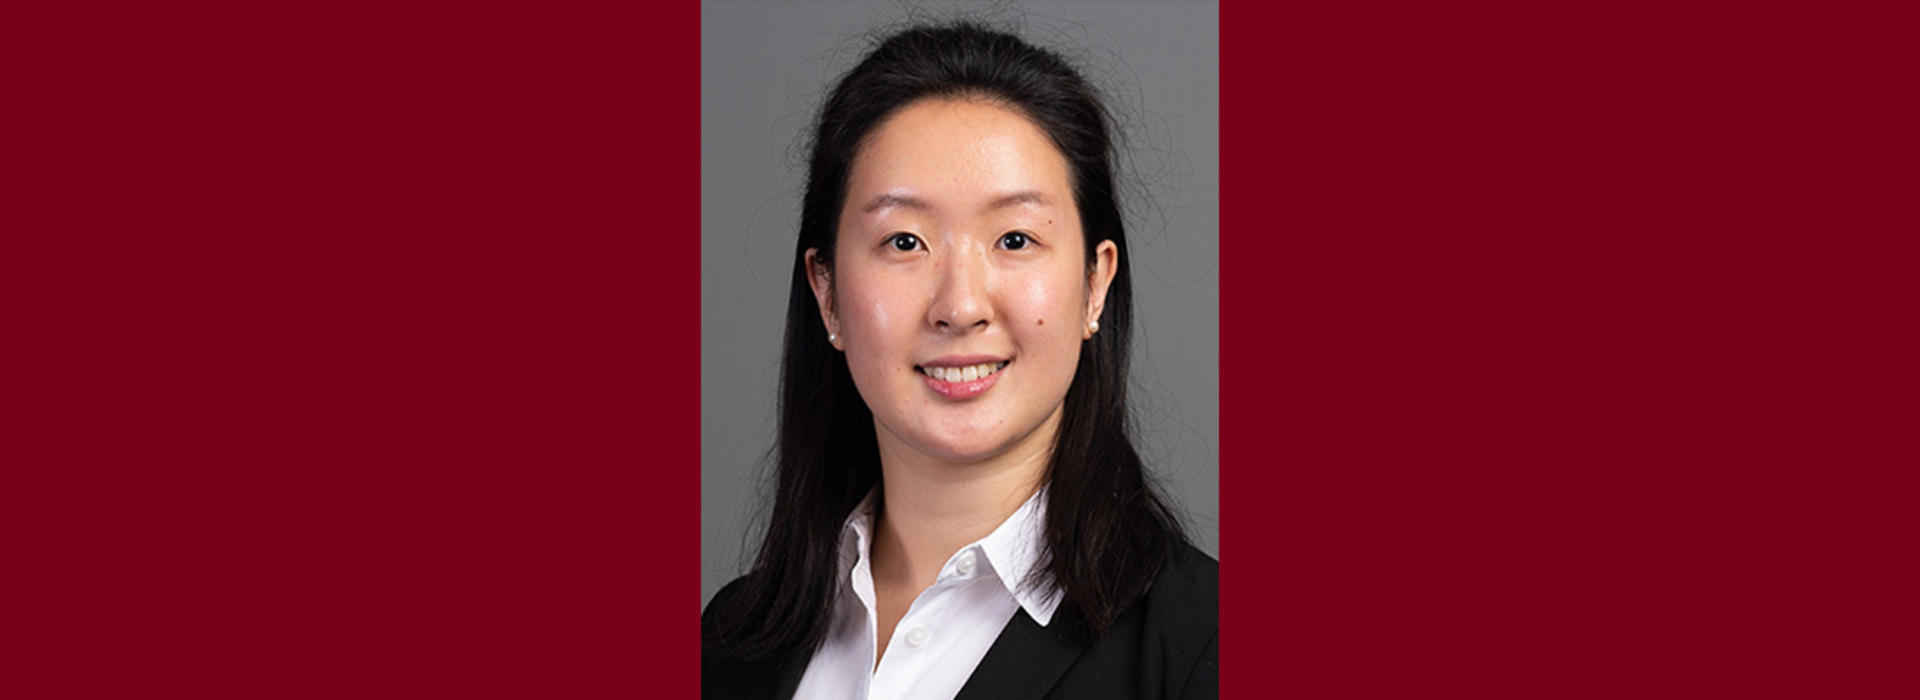 Catherine Pang, MD